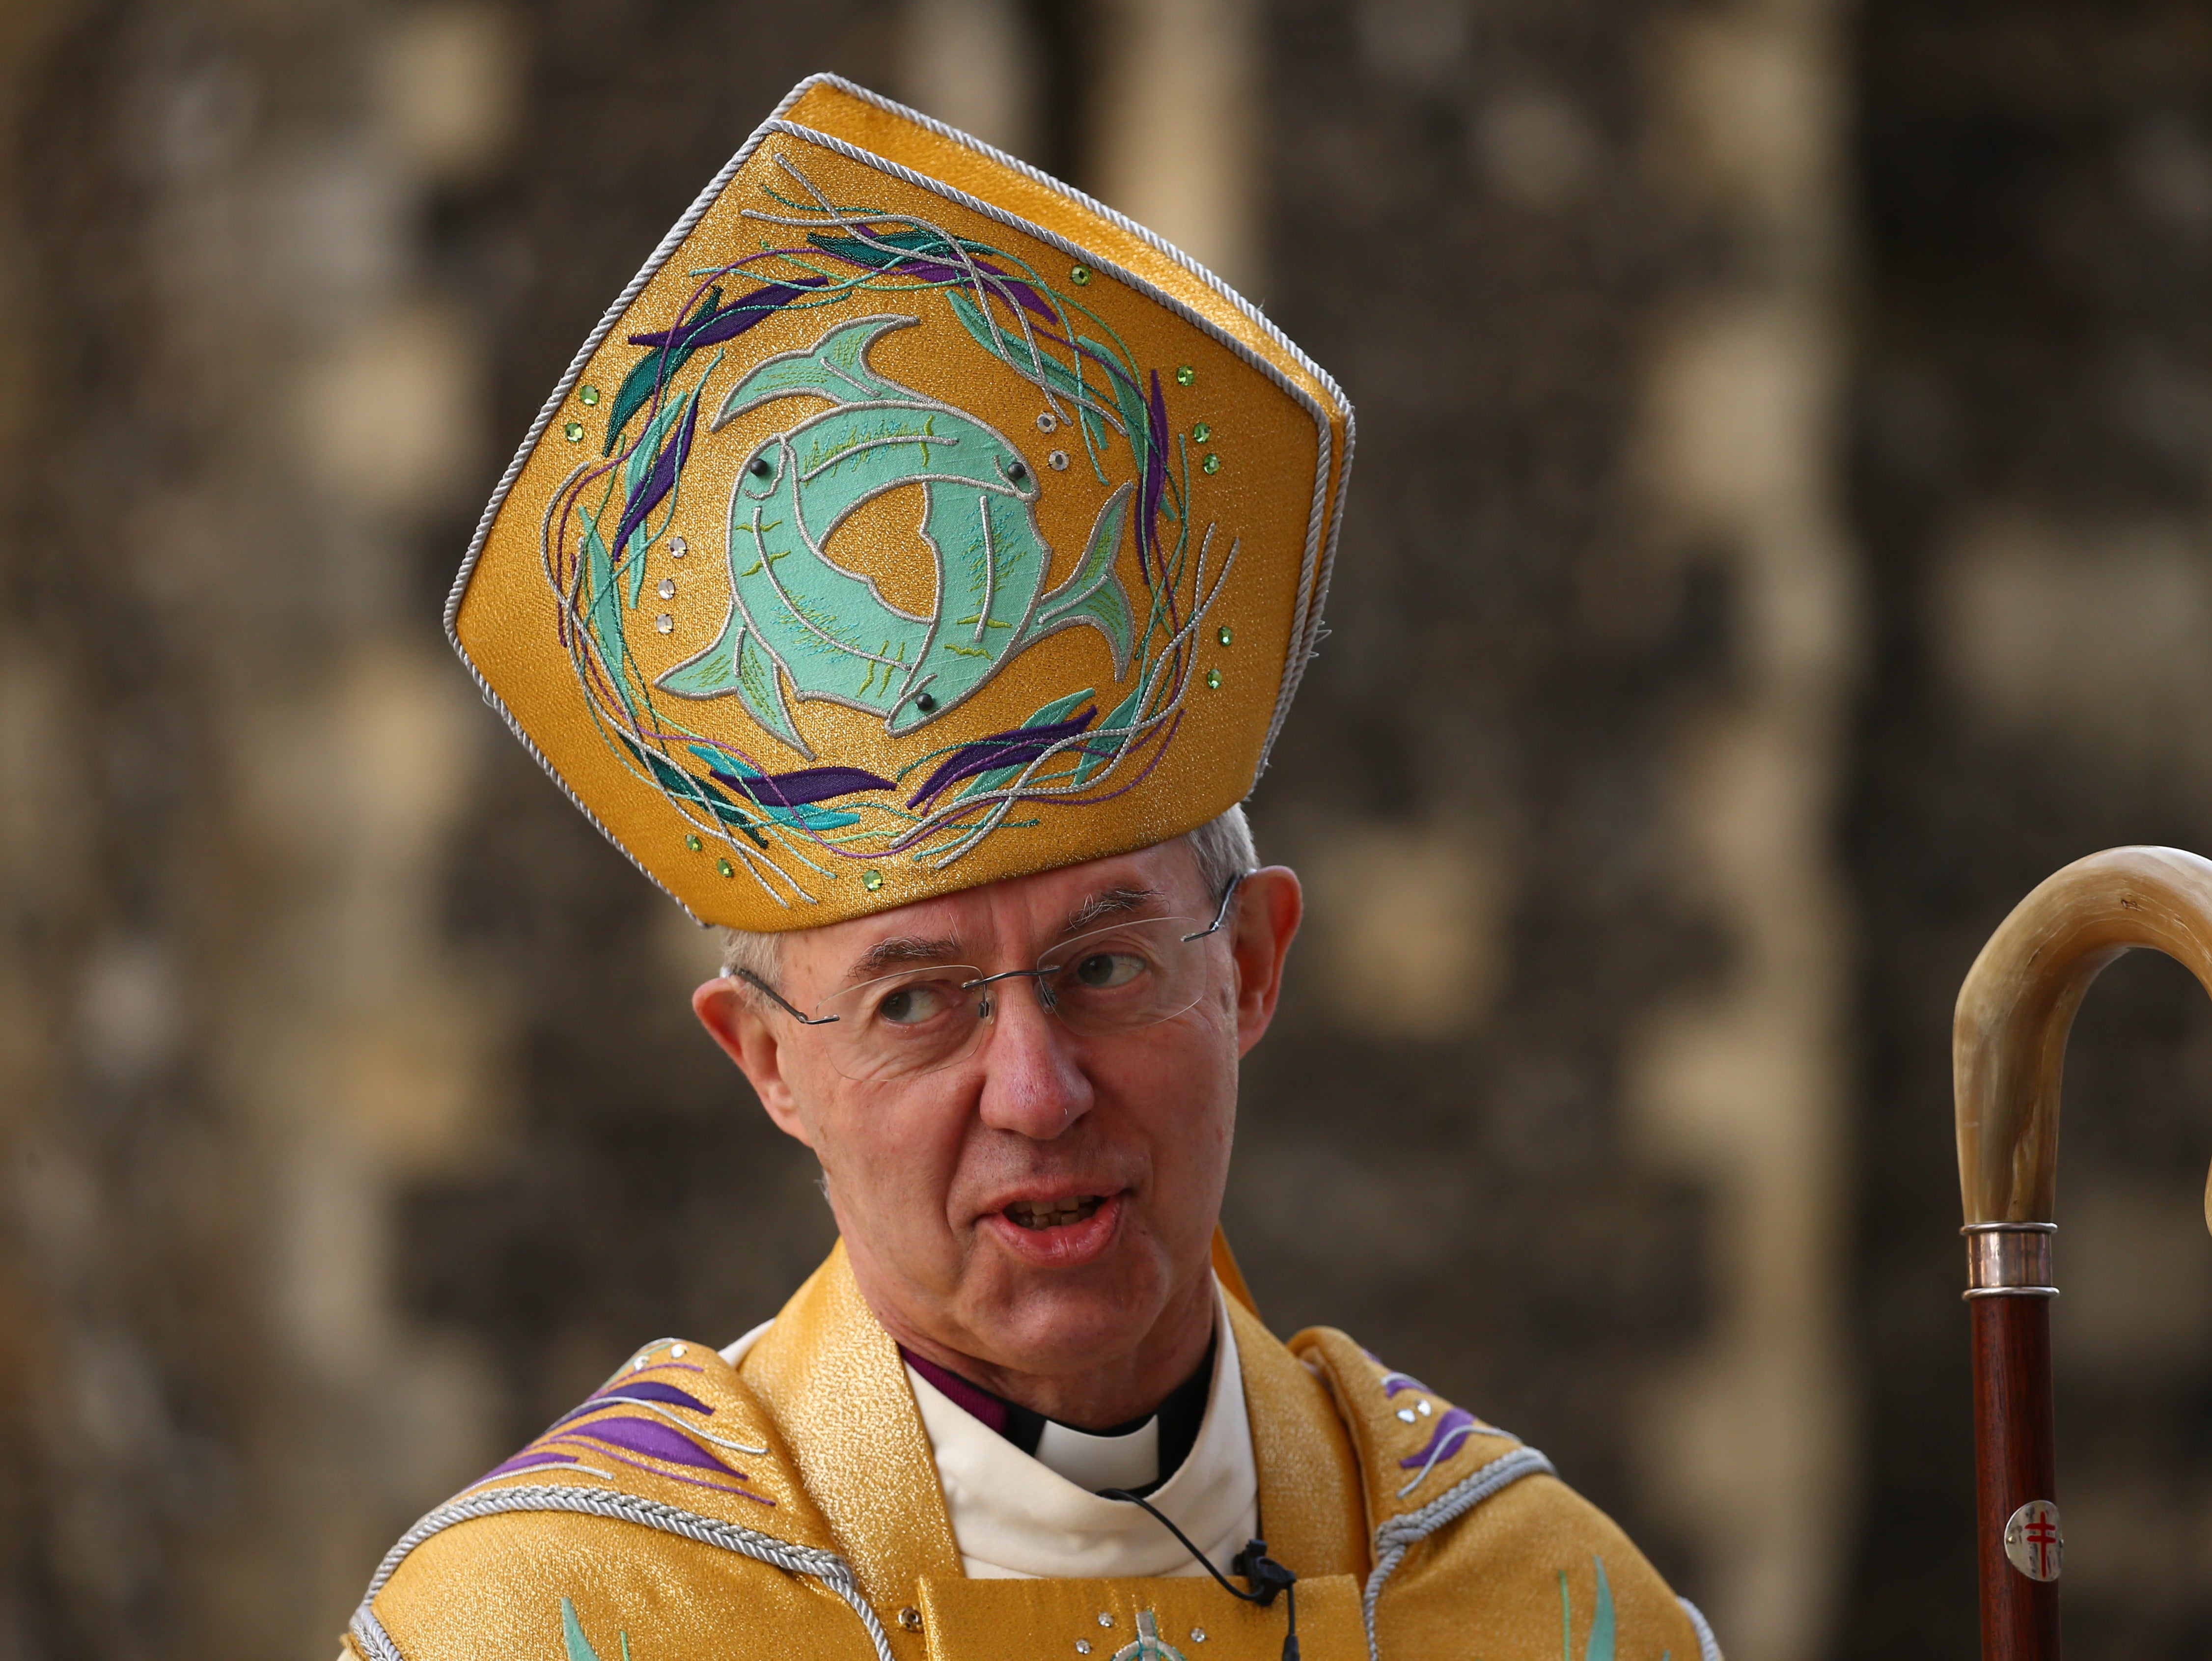 The Archbishop of Canterbury is set to miss the Jubilee service